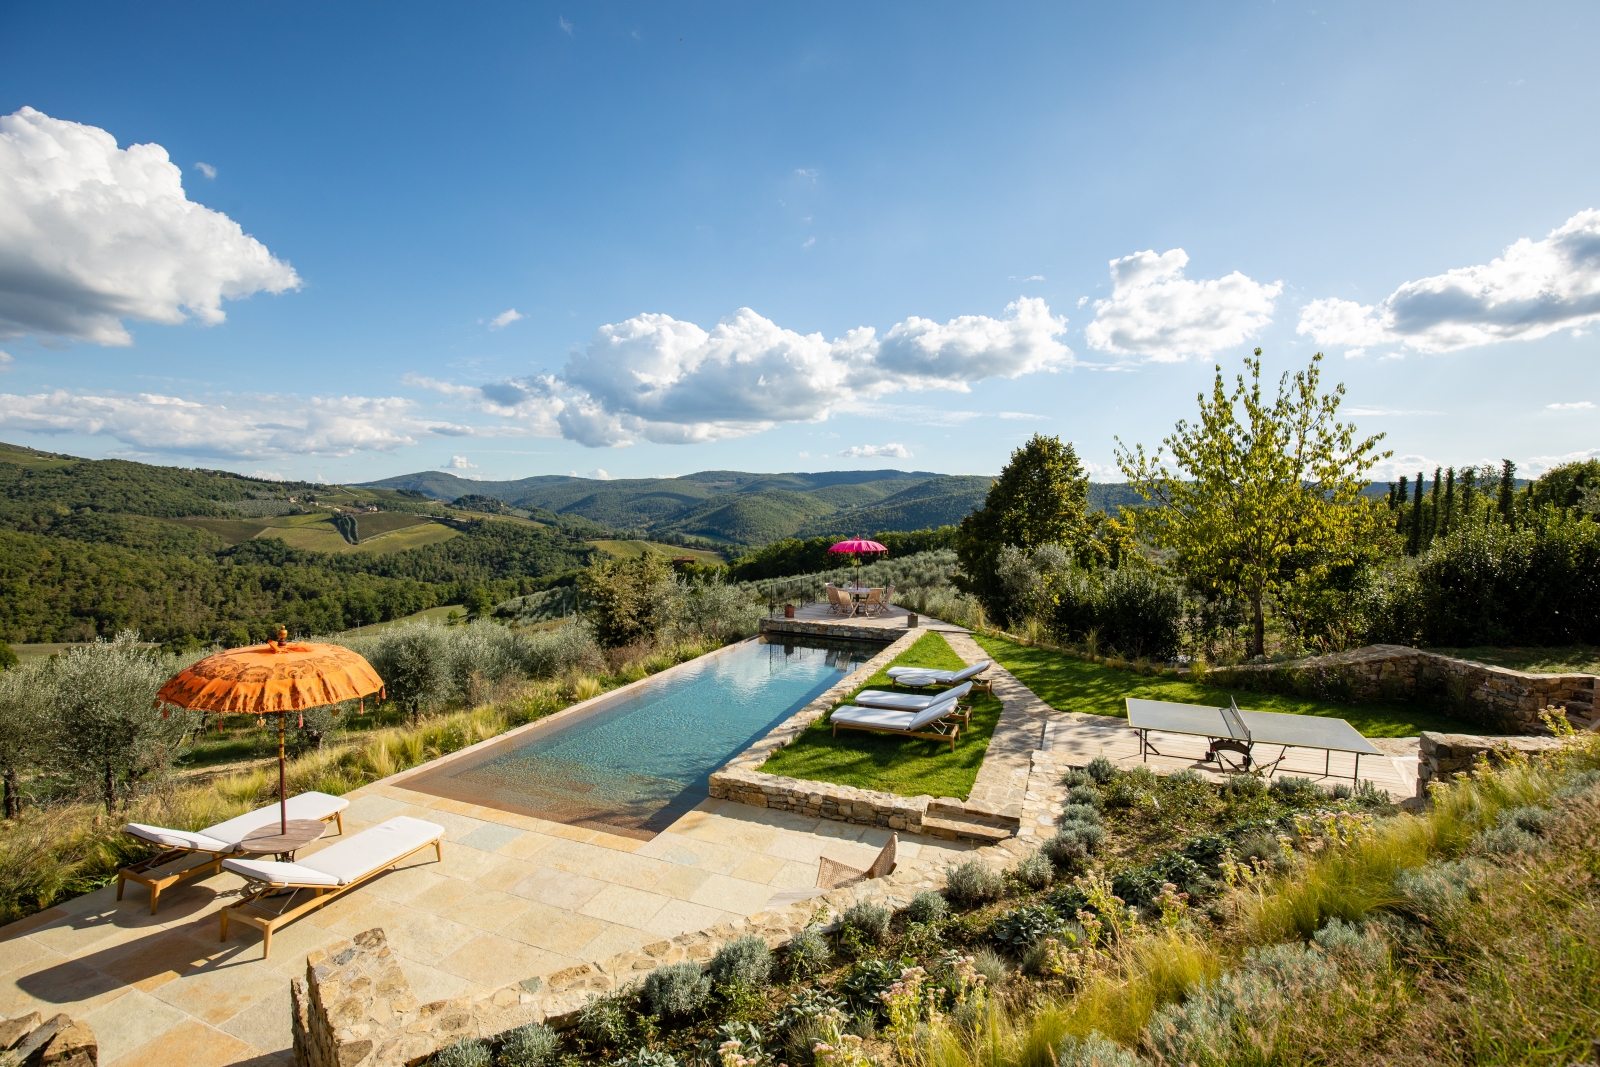 Pool and pool area with sun loungers, umbrellas, table tennis and countryside views at La Regina in Tuscany, Italy